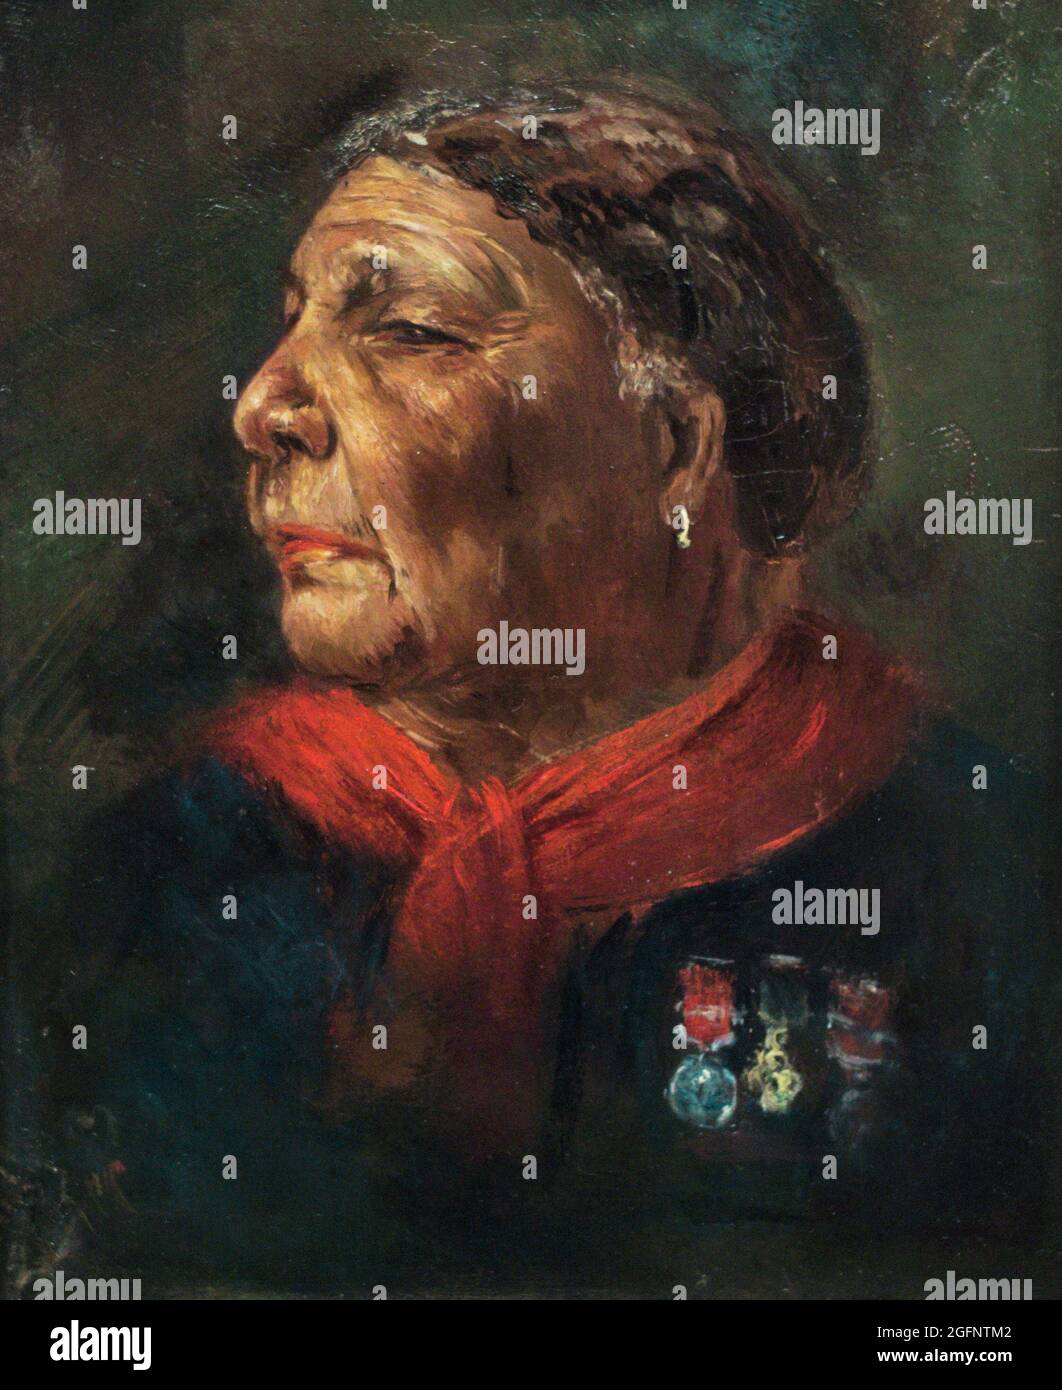 Mary Seacole (Mary Jane Seacole) (ca.1805-1881). Nurse of Jamaican origin. She opened the British Hotel during the Crimean War, halfway between the harbour and British Headquarters. She converted it into an officers' club and canteen for the troops. Portrait by Albert Charles Challen (1847-1881). Oil on panel (24 x 18 cm), 1869. National Portrait Gallery. London, England, United Kingdom. Stock Photo